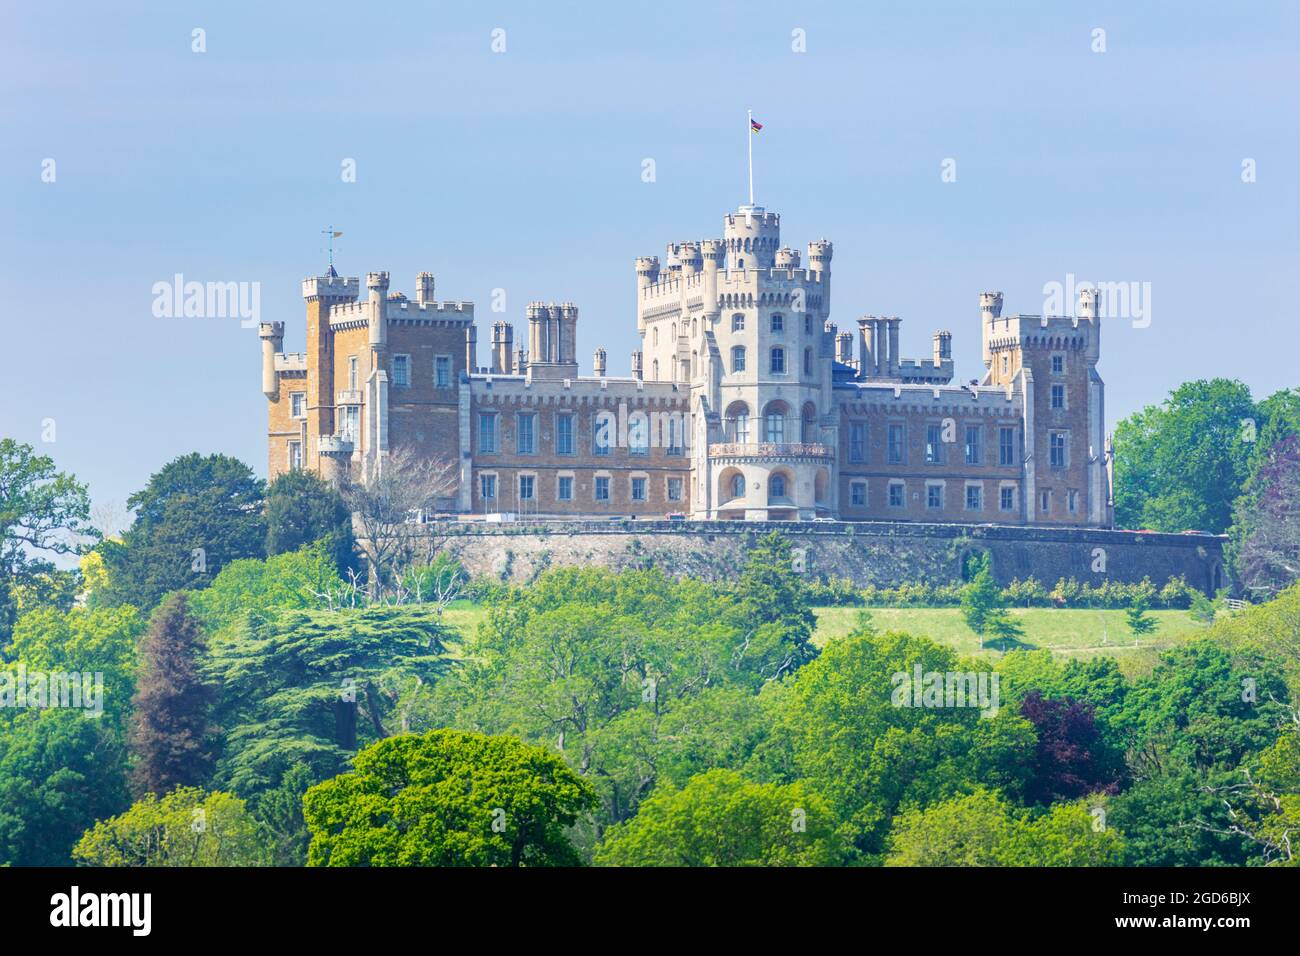 View of Belvoir Castle from across the fields of the Vale of Belvoir Grantham Leicestershire England UK GB Europe Stock Photo